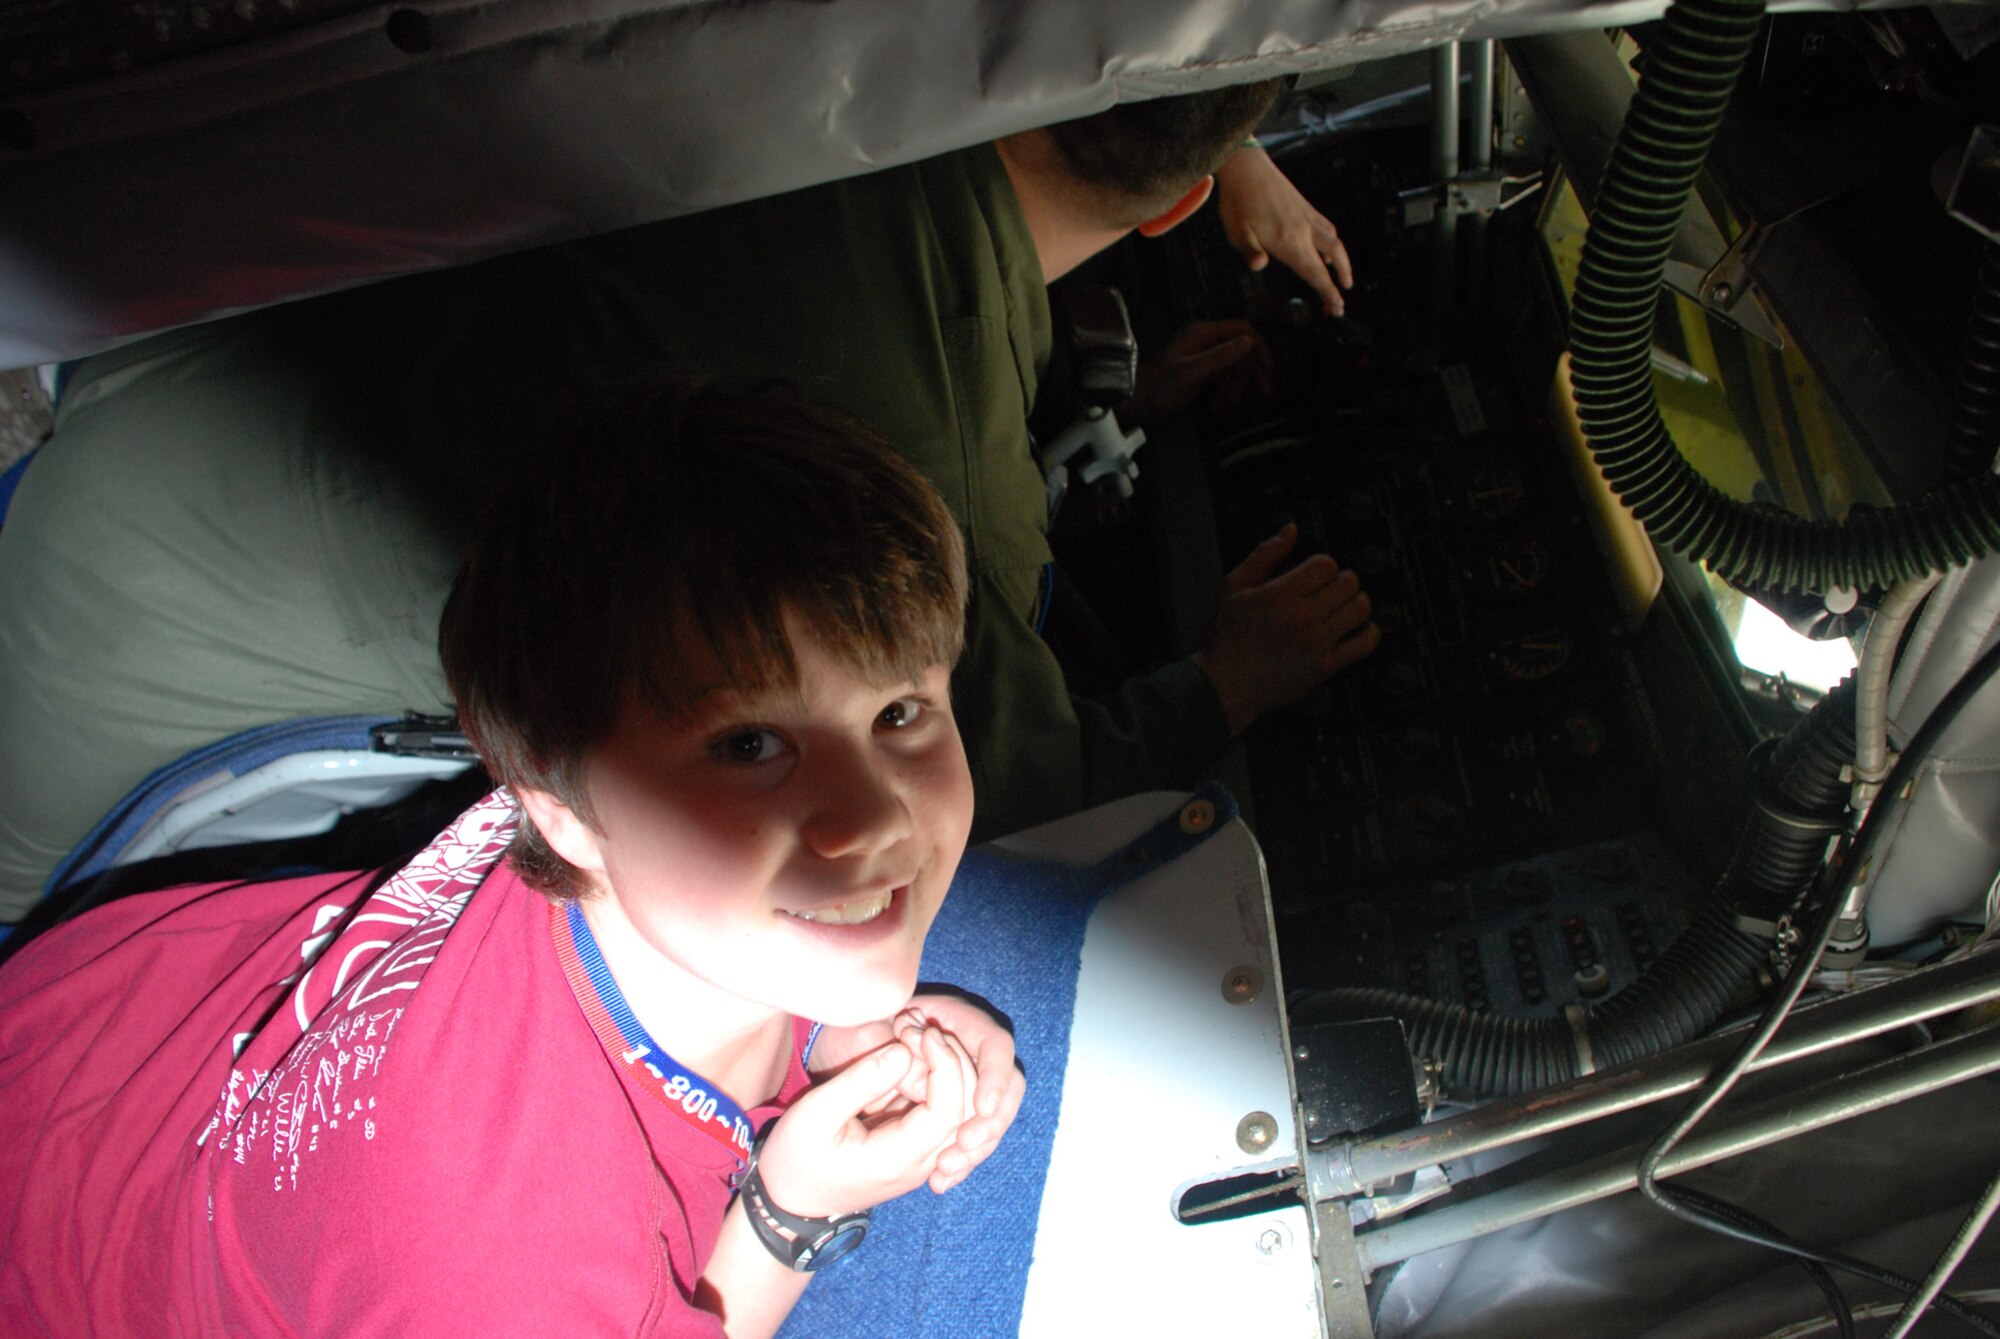 Nick Albrecht, 11, son of Tech Sgt. Robert Albrecht, 107th Airlift Wing, hangs out in the boom pod, of a KC-135R while 107th Airlift Wing boomer, Master Sgt. Raymond Fitzpatrick, describes his job.  Nick is attending a tour of the 107th?s aircraft during bring your kids to work day April 24.  